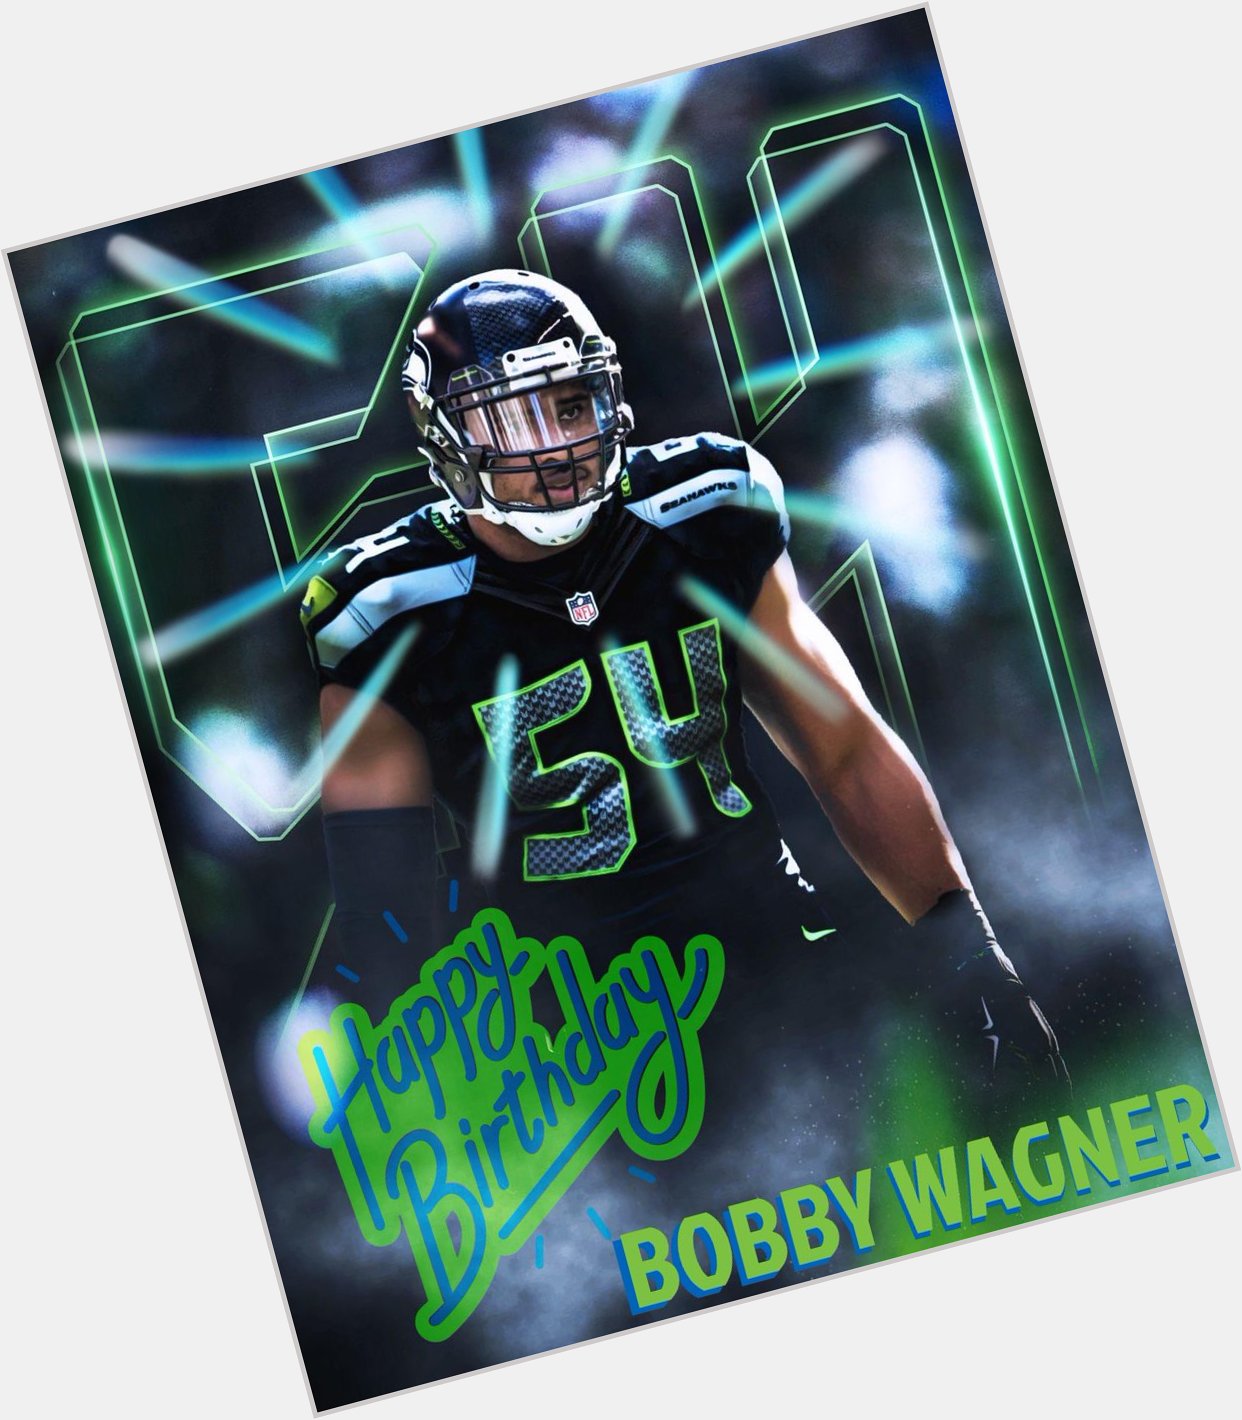 Happy 32nd Birthday To a SEAHAWKS legend, BOBBY WAGNER      